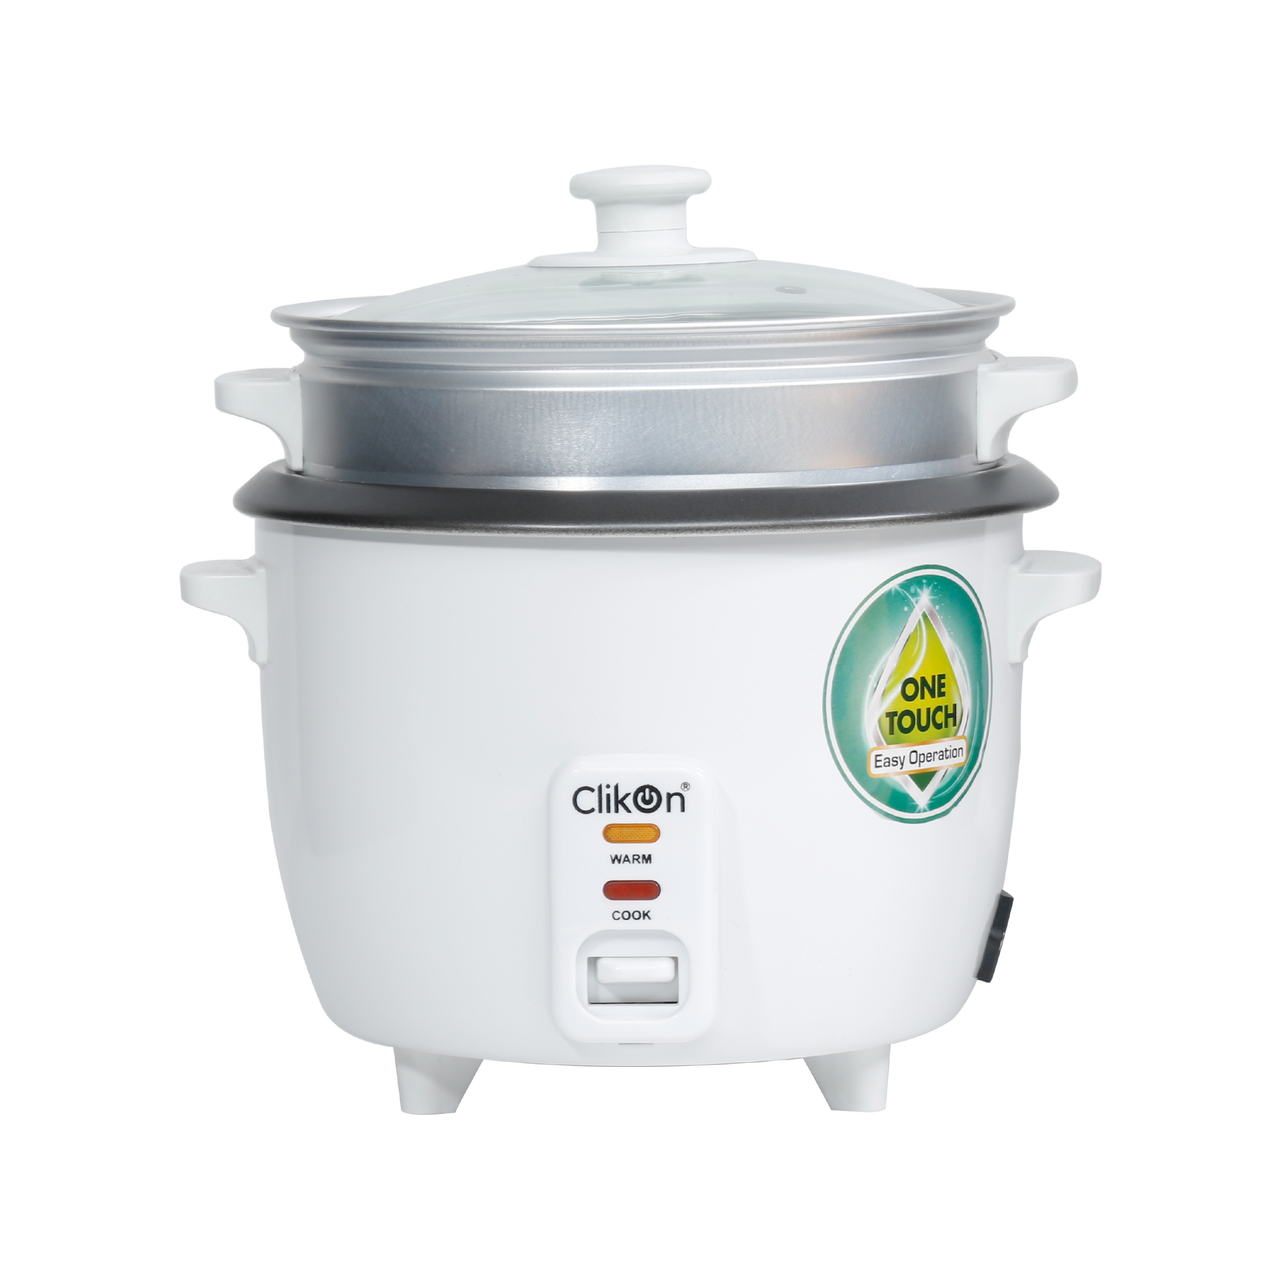 Clikon Rice Cooker With Steamer 1.5 Liter 500 Watts | in Bahrain | Halabh.com